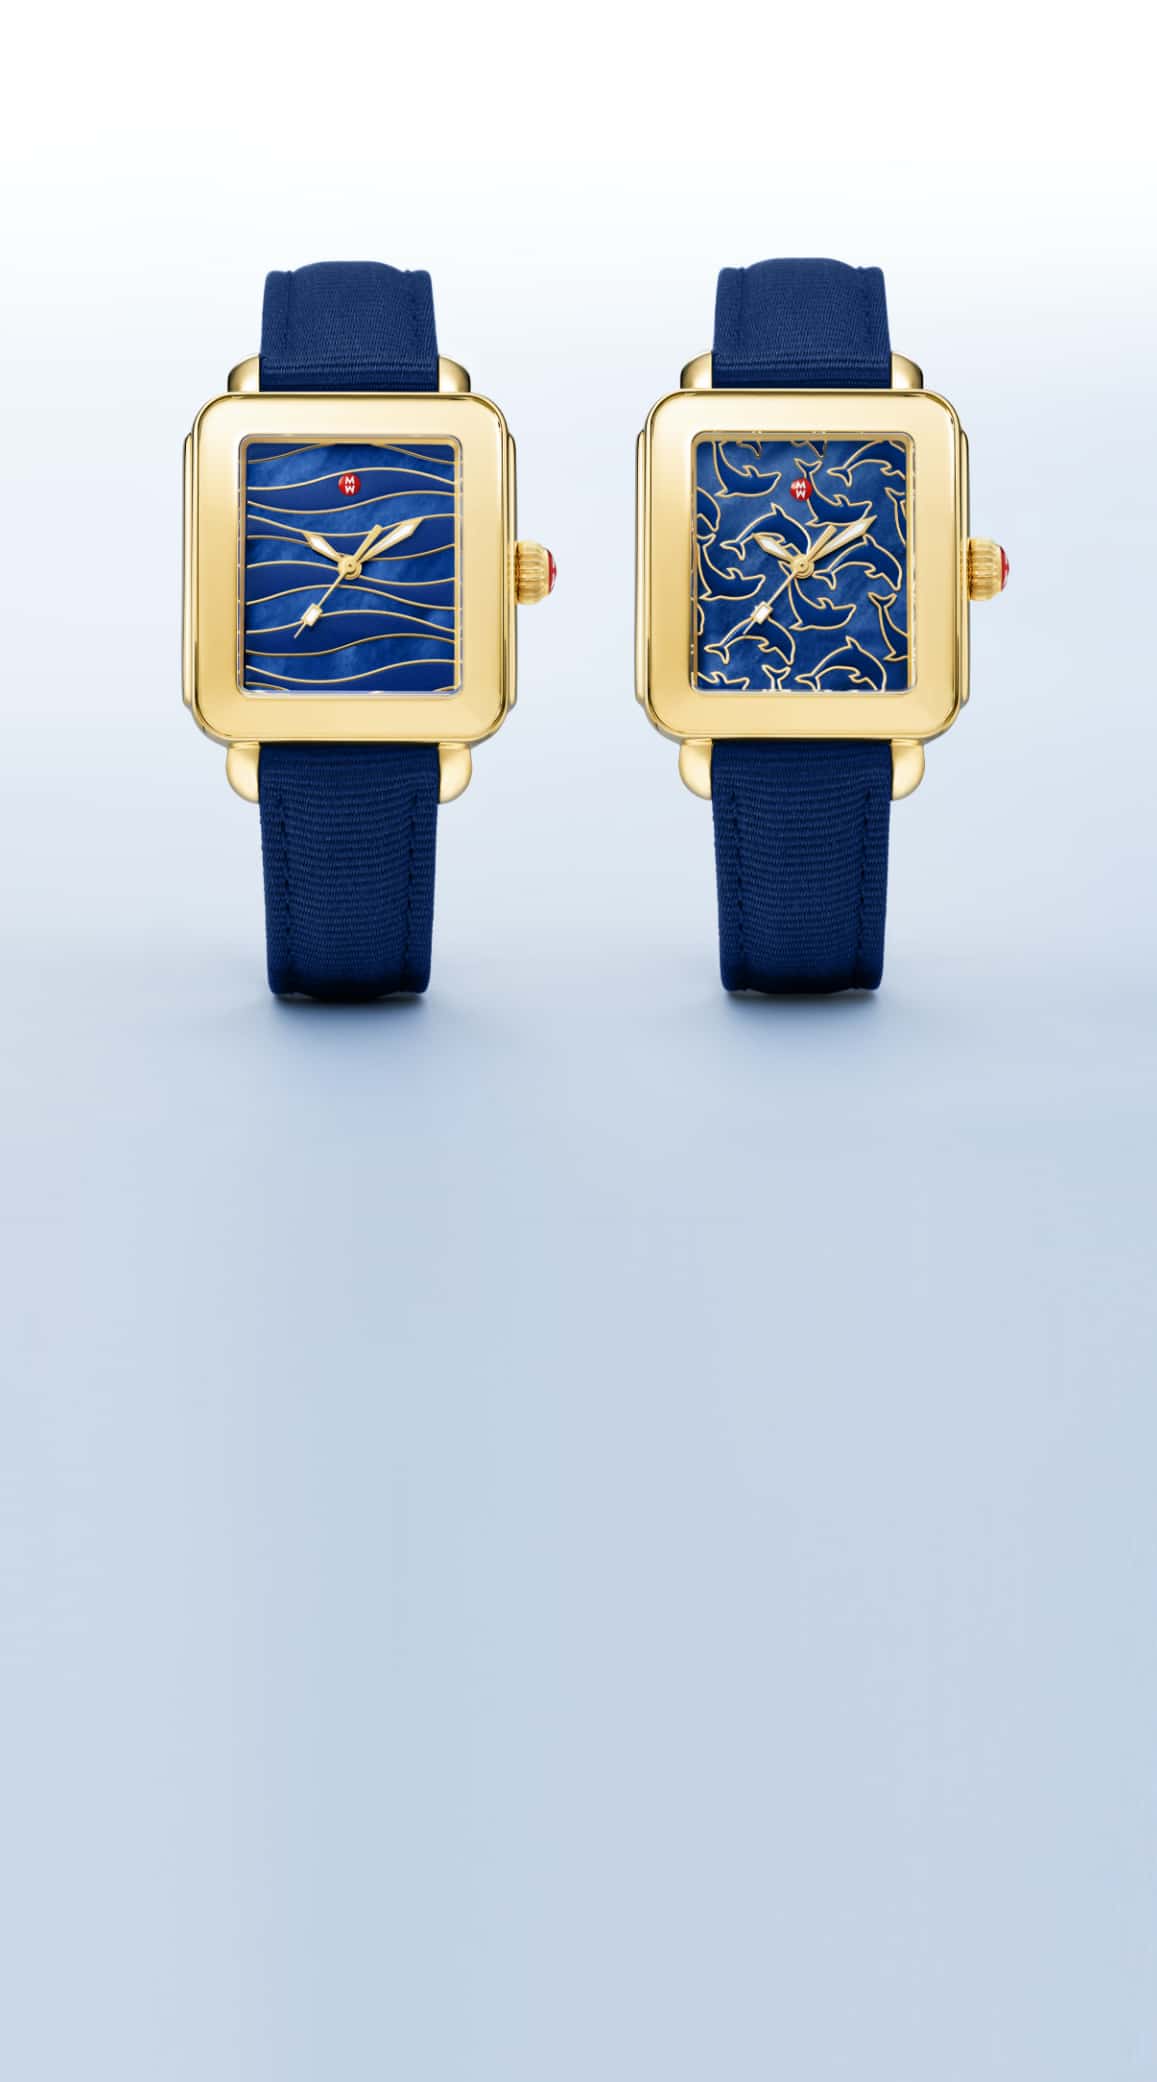 two MICHELE Deco Sport Sustainable watches with blue faces